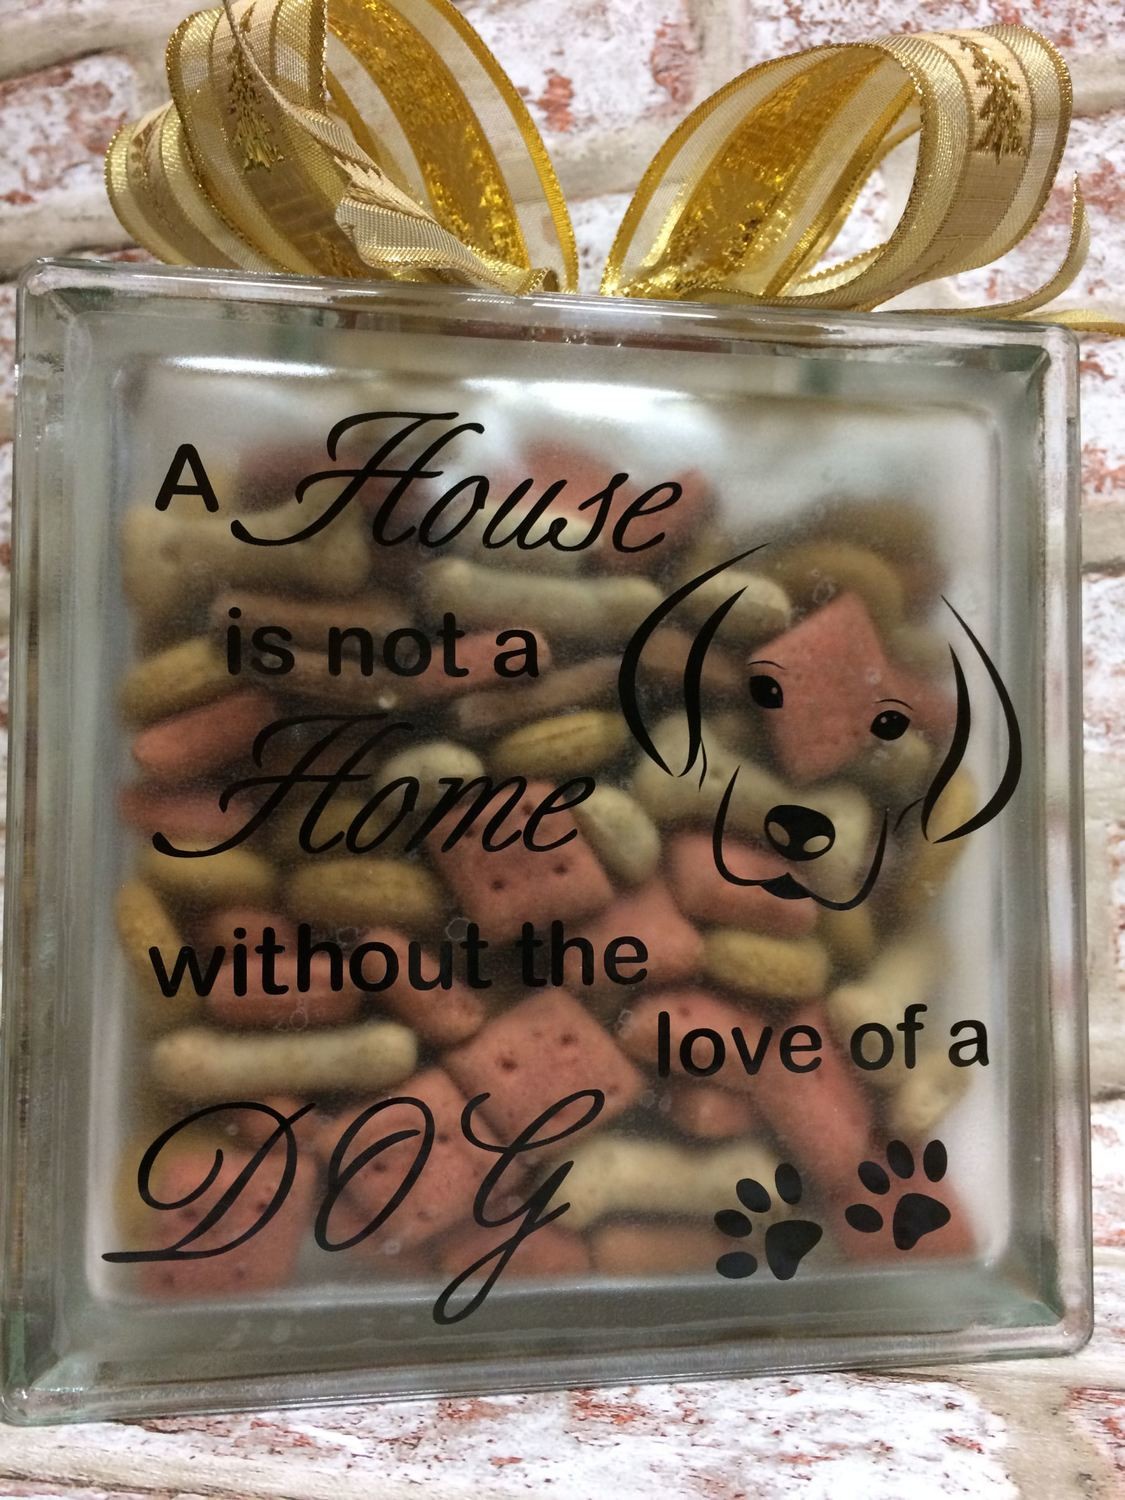 A House is not a home without the love of a Dog - vinyl HTV etc